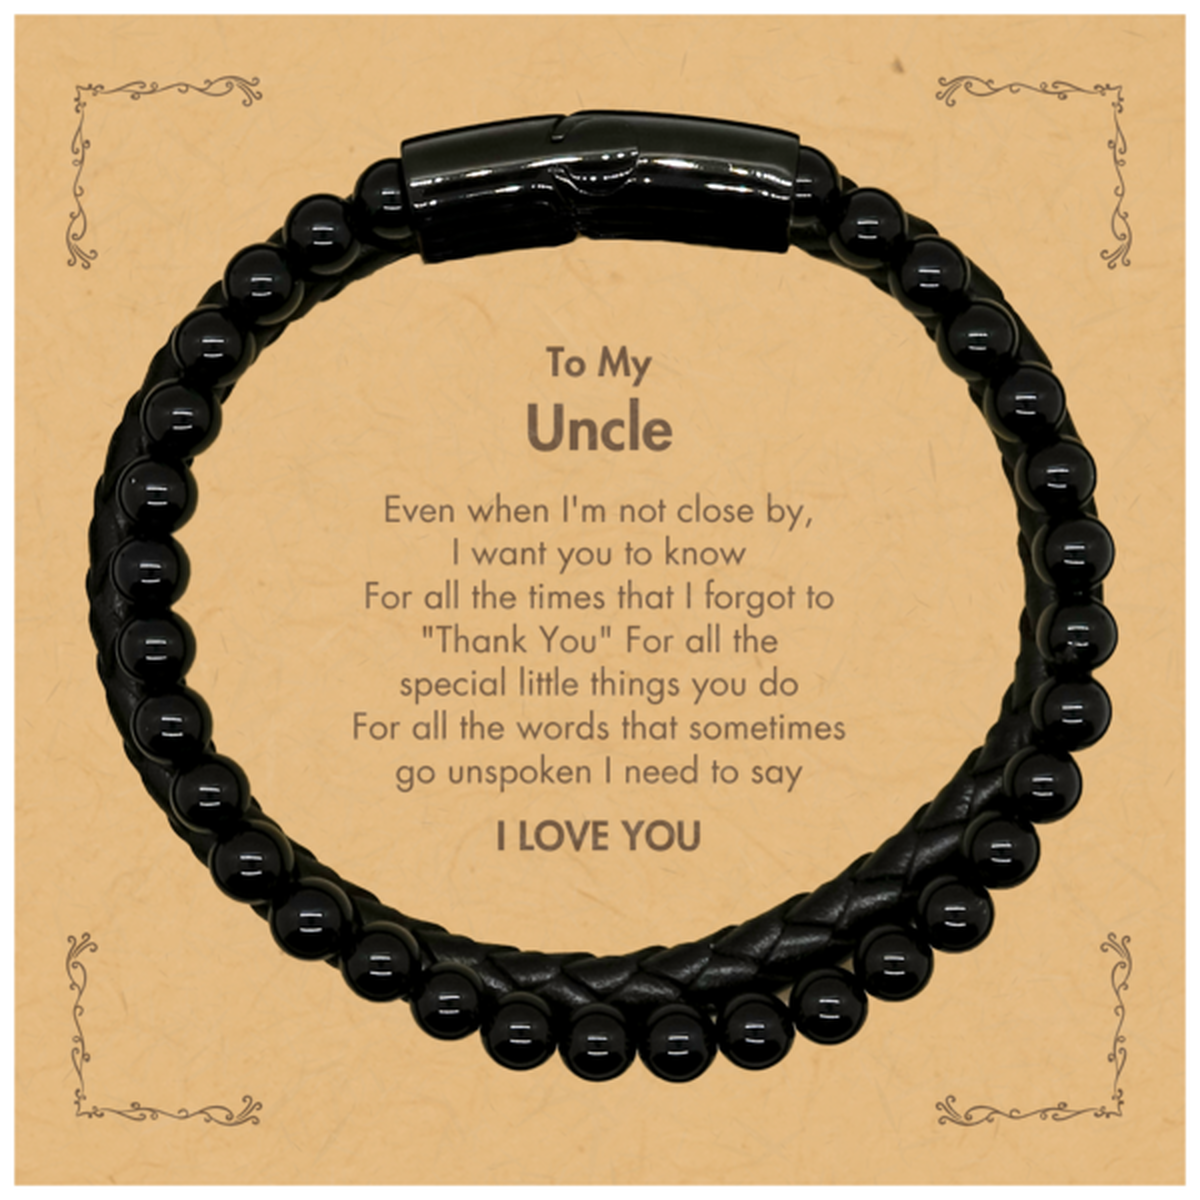 Thank You Gifts for Uncle, Keepsake Stone Leather Bracelets Gifts for Uncle Birthday Mother's day Father's Day Uncle For all the words That sometimes go unspoken I need to say I LOVE YOU